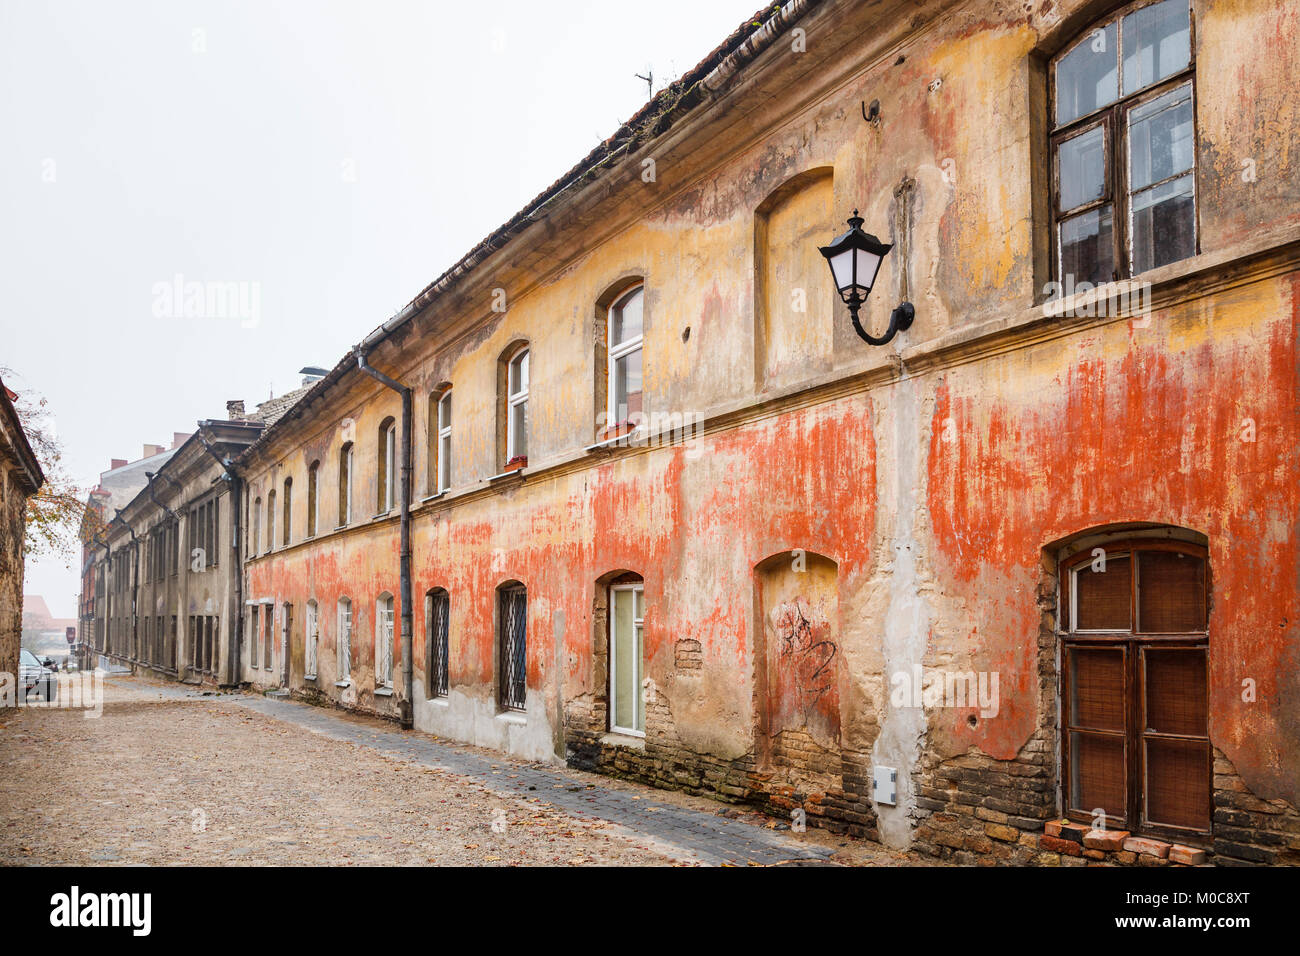 Dilapidated, run-down side street of empty old terraced houses with crumbling brickwork in Vilnius Old Town, capital city of Lithuania, eastern Europe Stock Photo